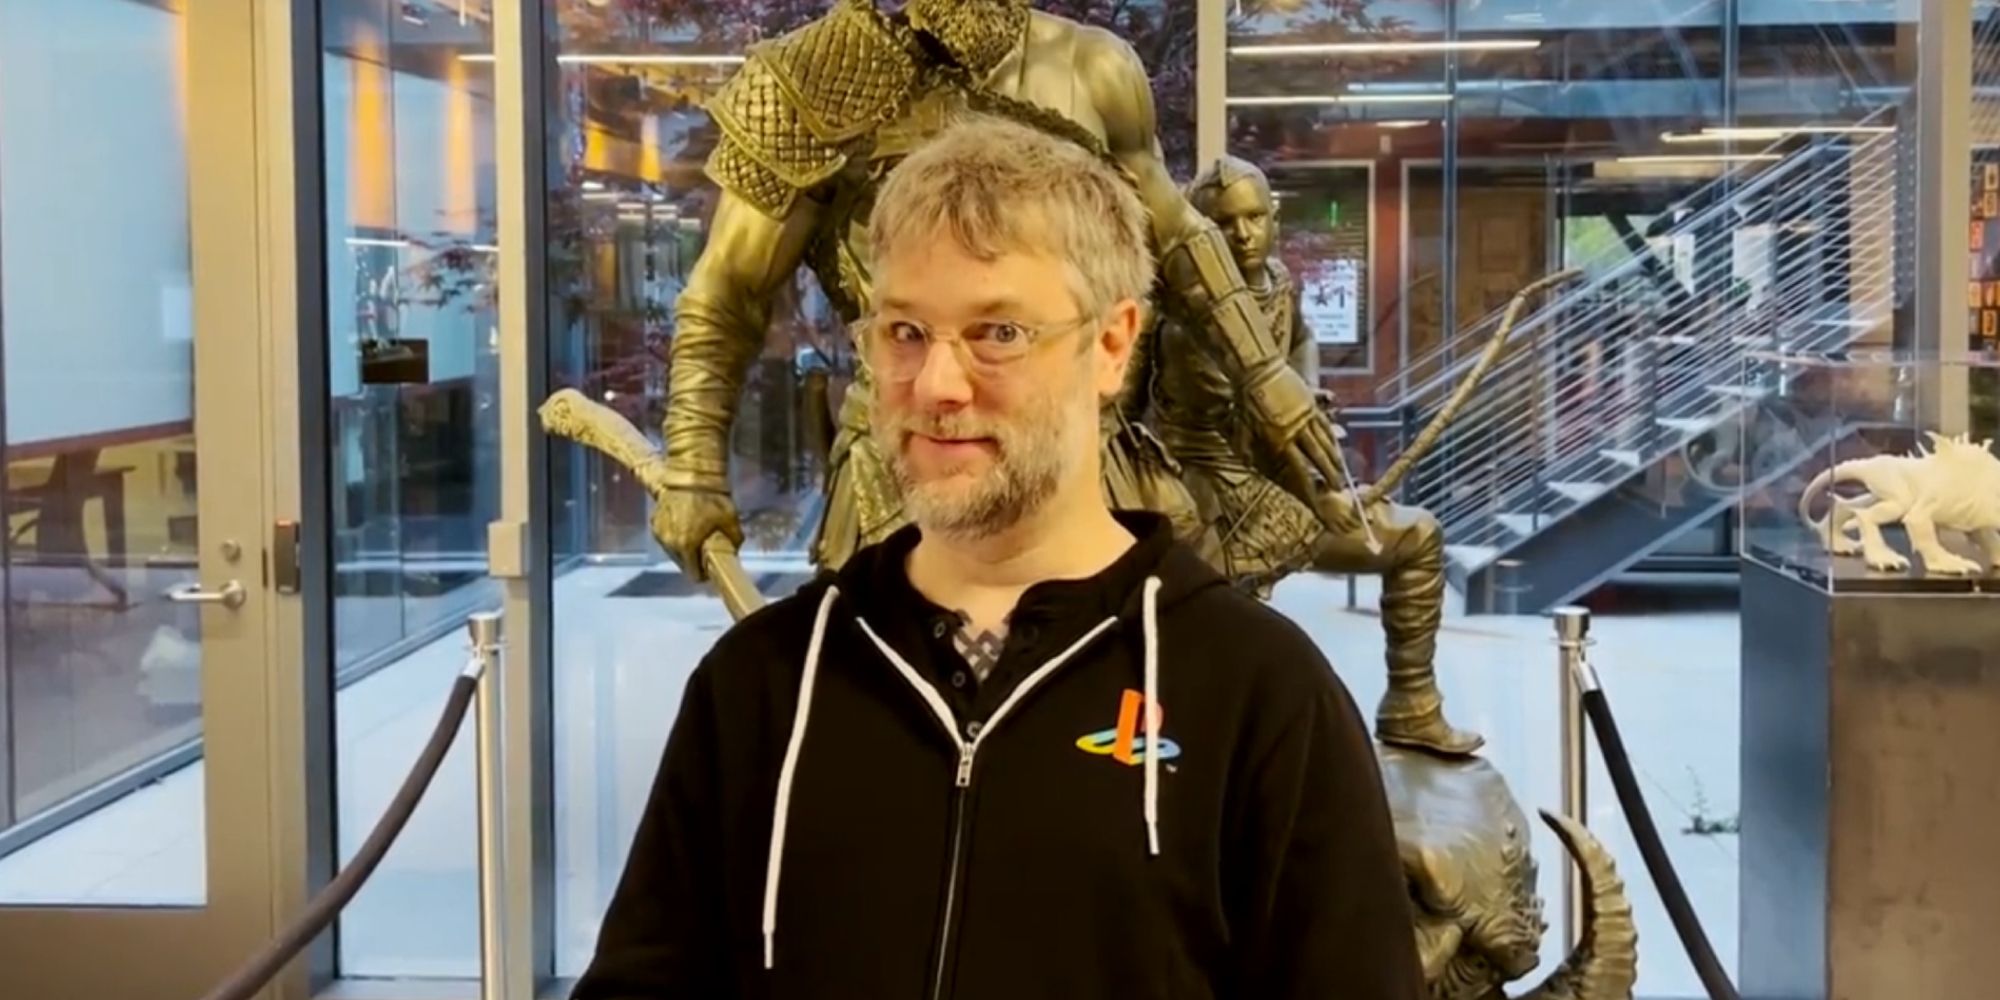 Cory Barlog stood in front of a statue of Kratos and Atreus